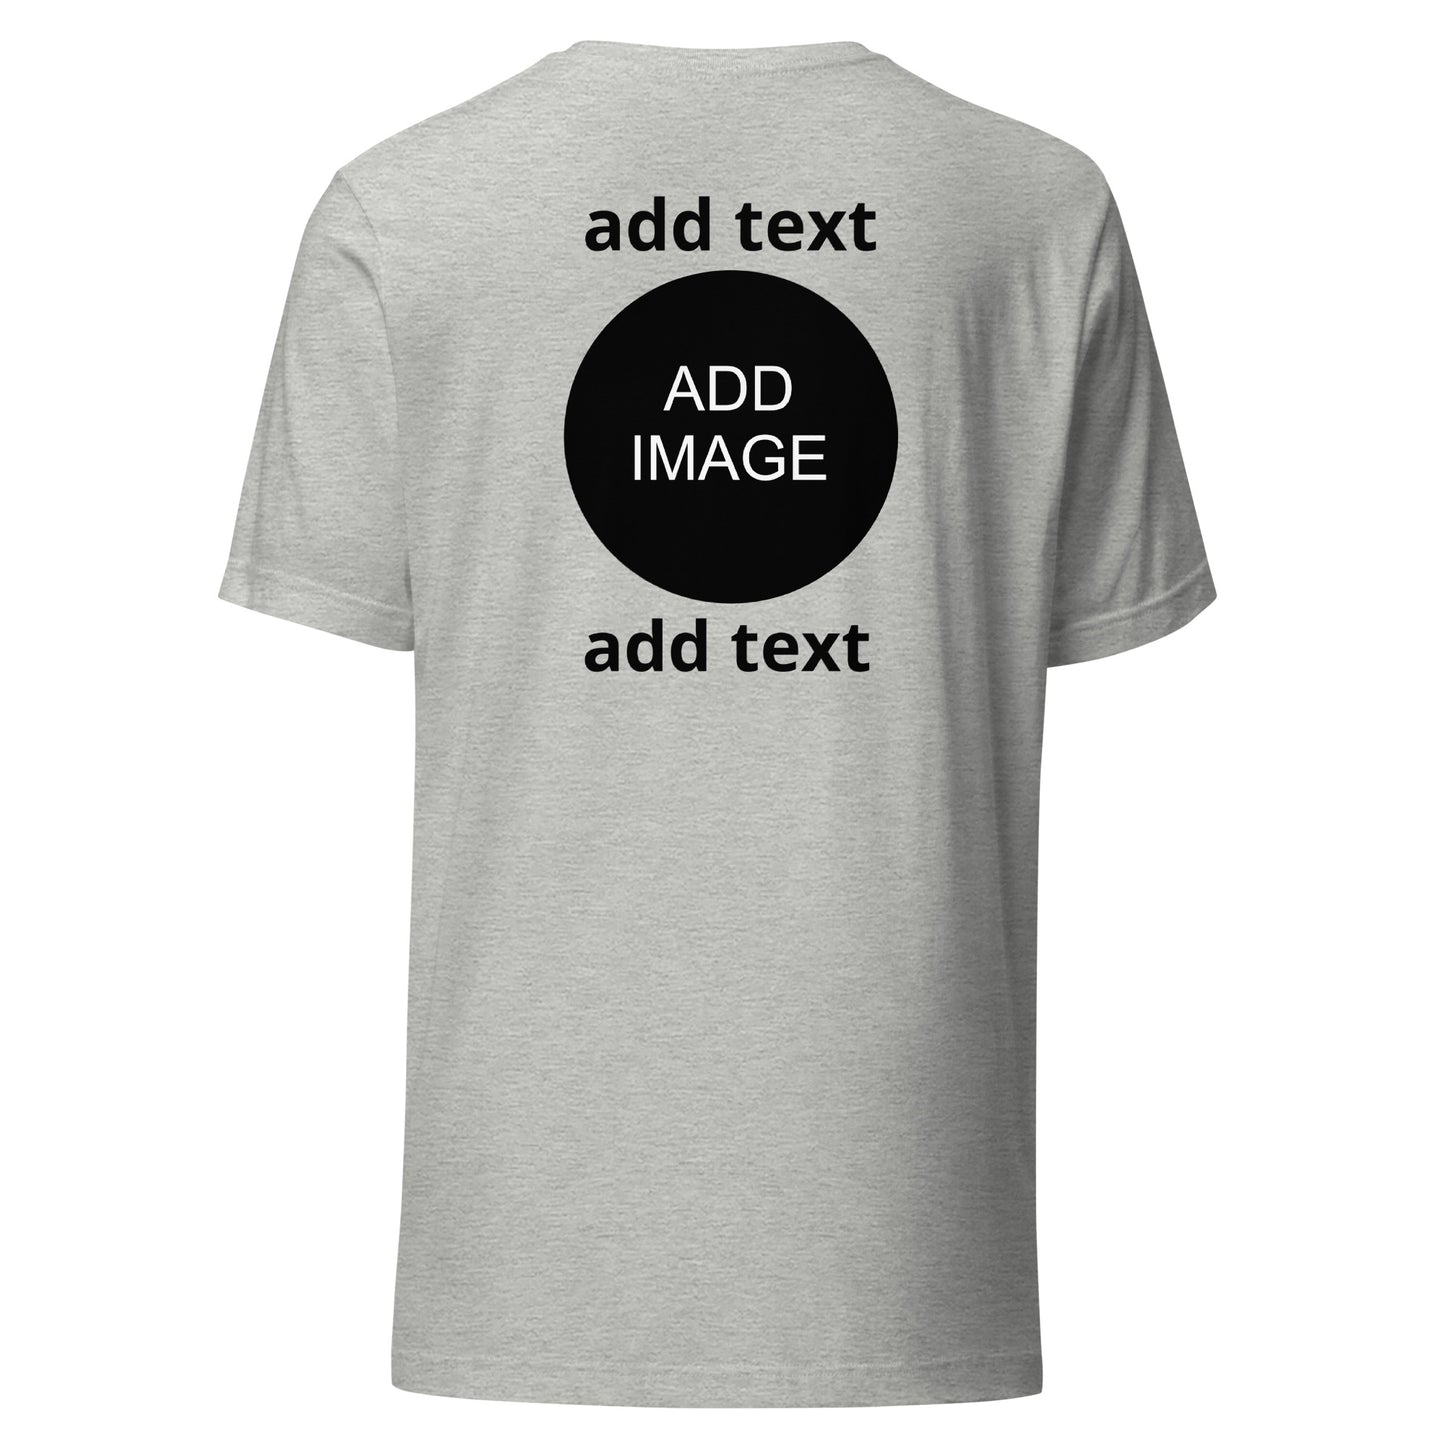 Large - XL Unisex [front & back image with top & bottom black text]